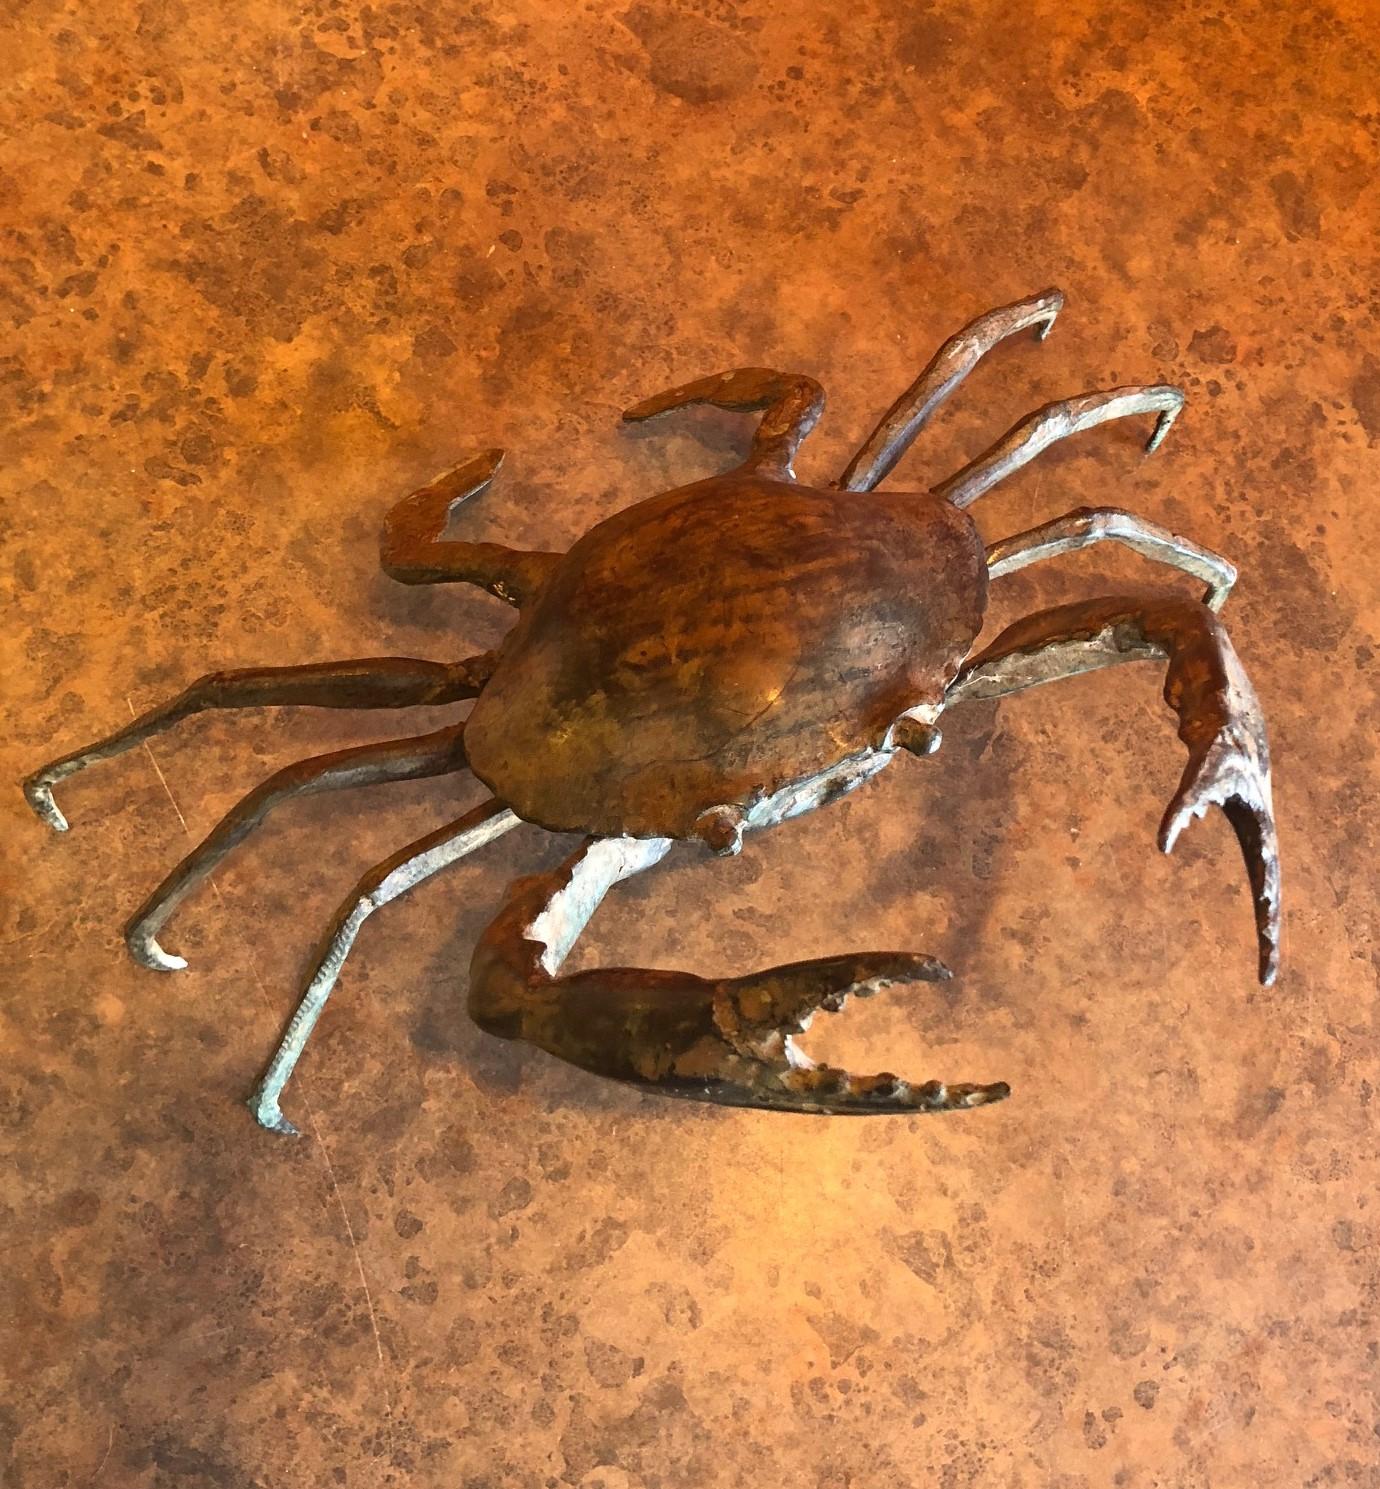 A well detailed and patinated articulated bronze crab sculpture, circa 1970s. The piece has an Asian flair to it and may be vintage Chinese.